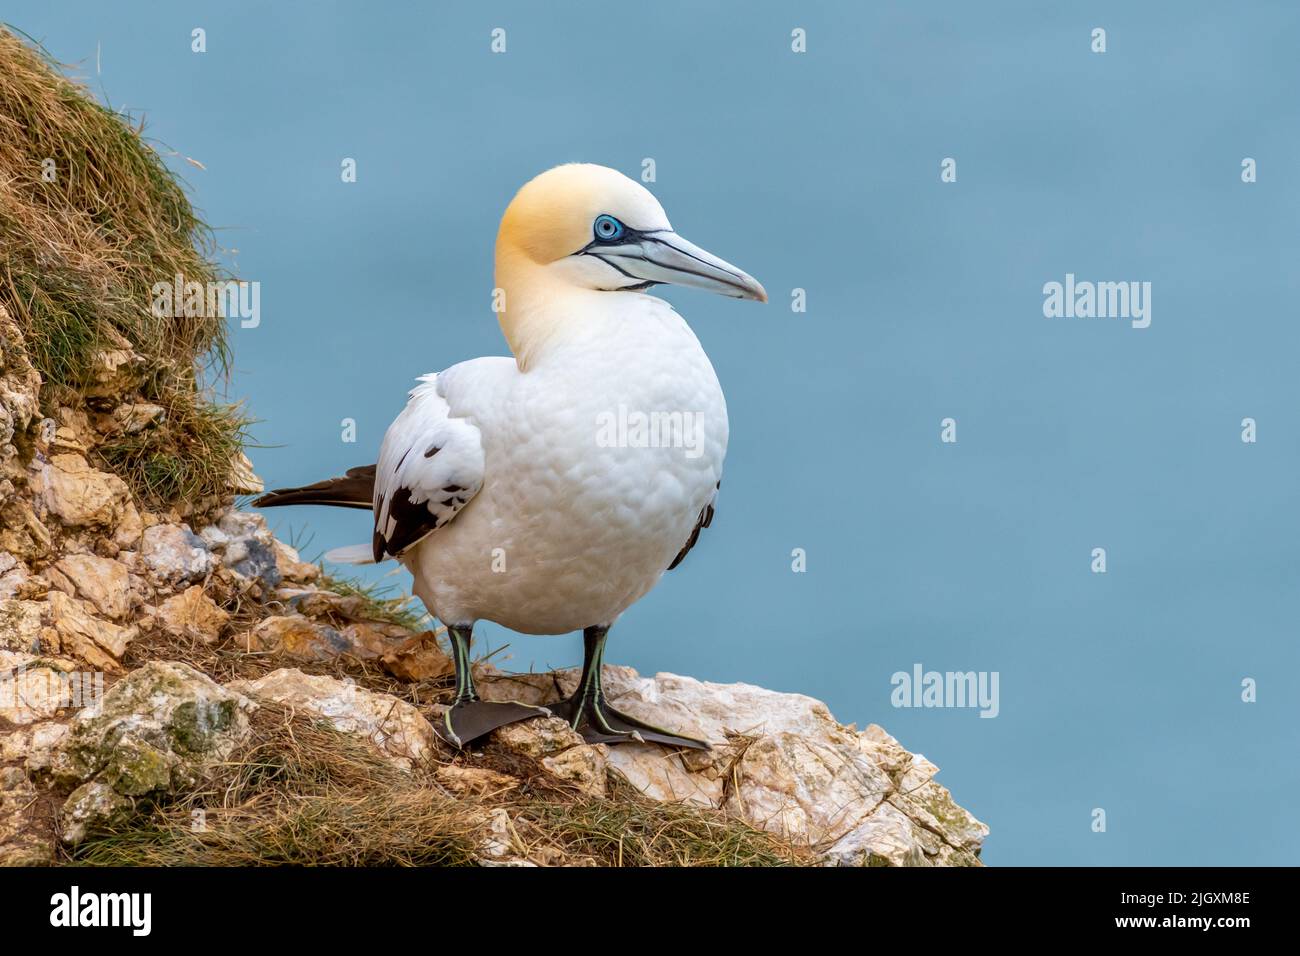 Northern Gannet perched on a rock on a sea cliff, RSPB Bempton Cliffs, England, UK Stock Photo